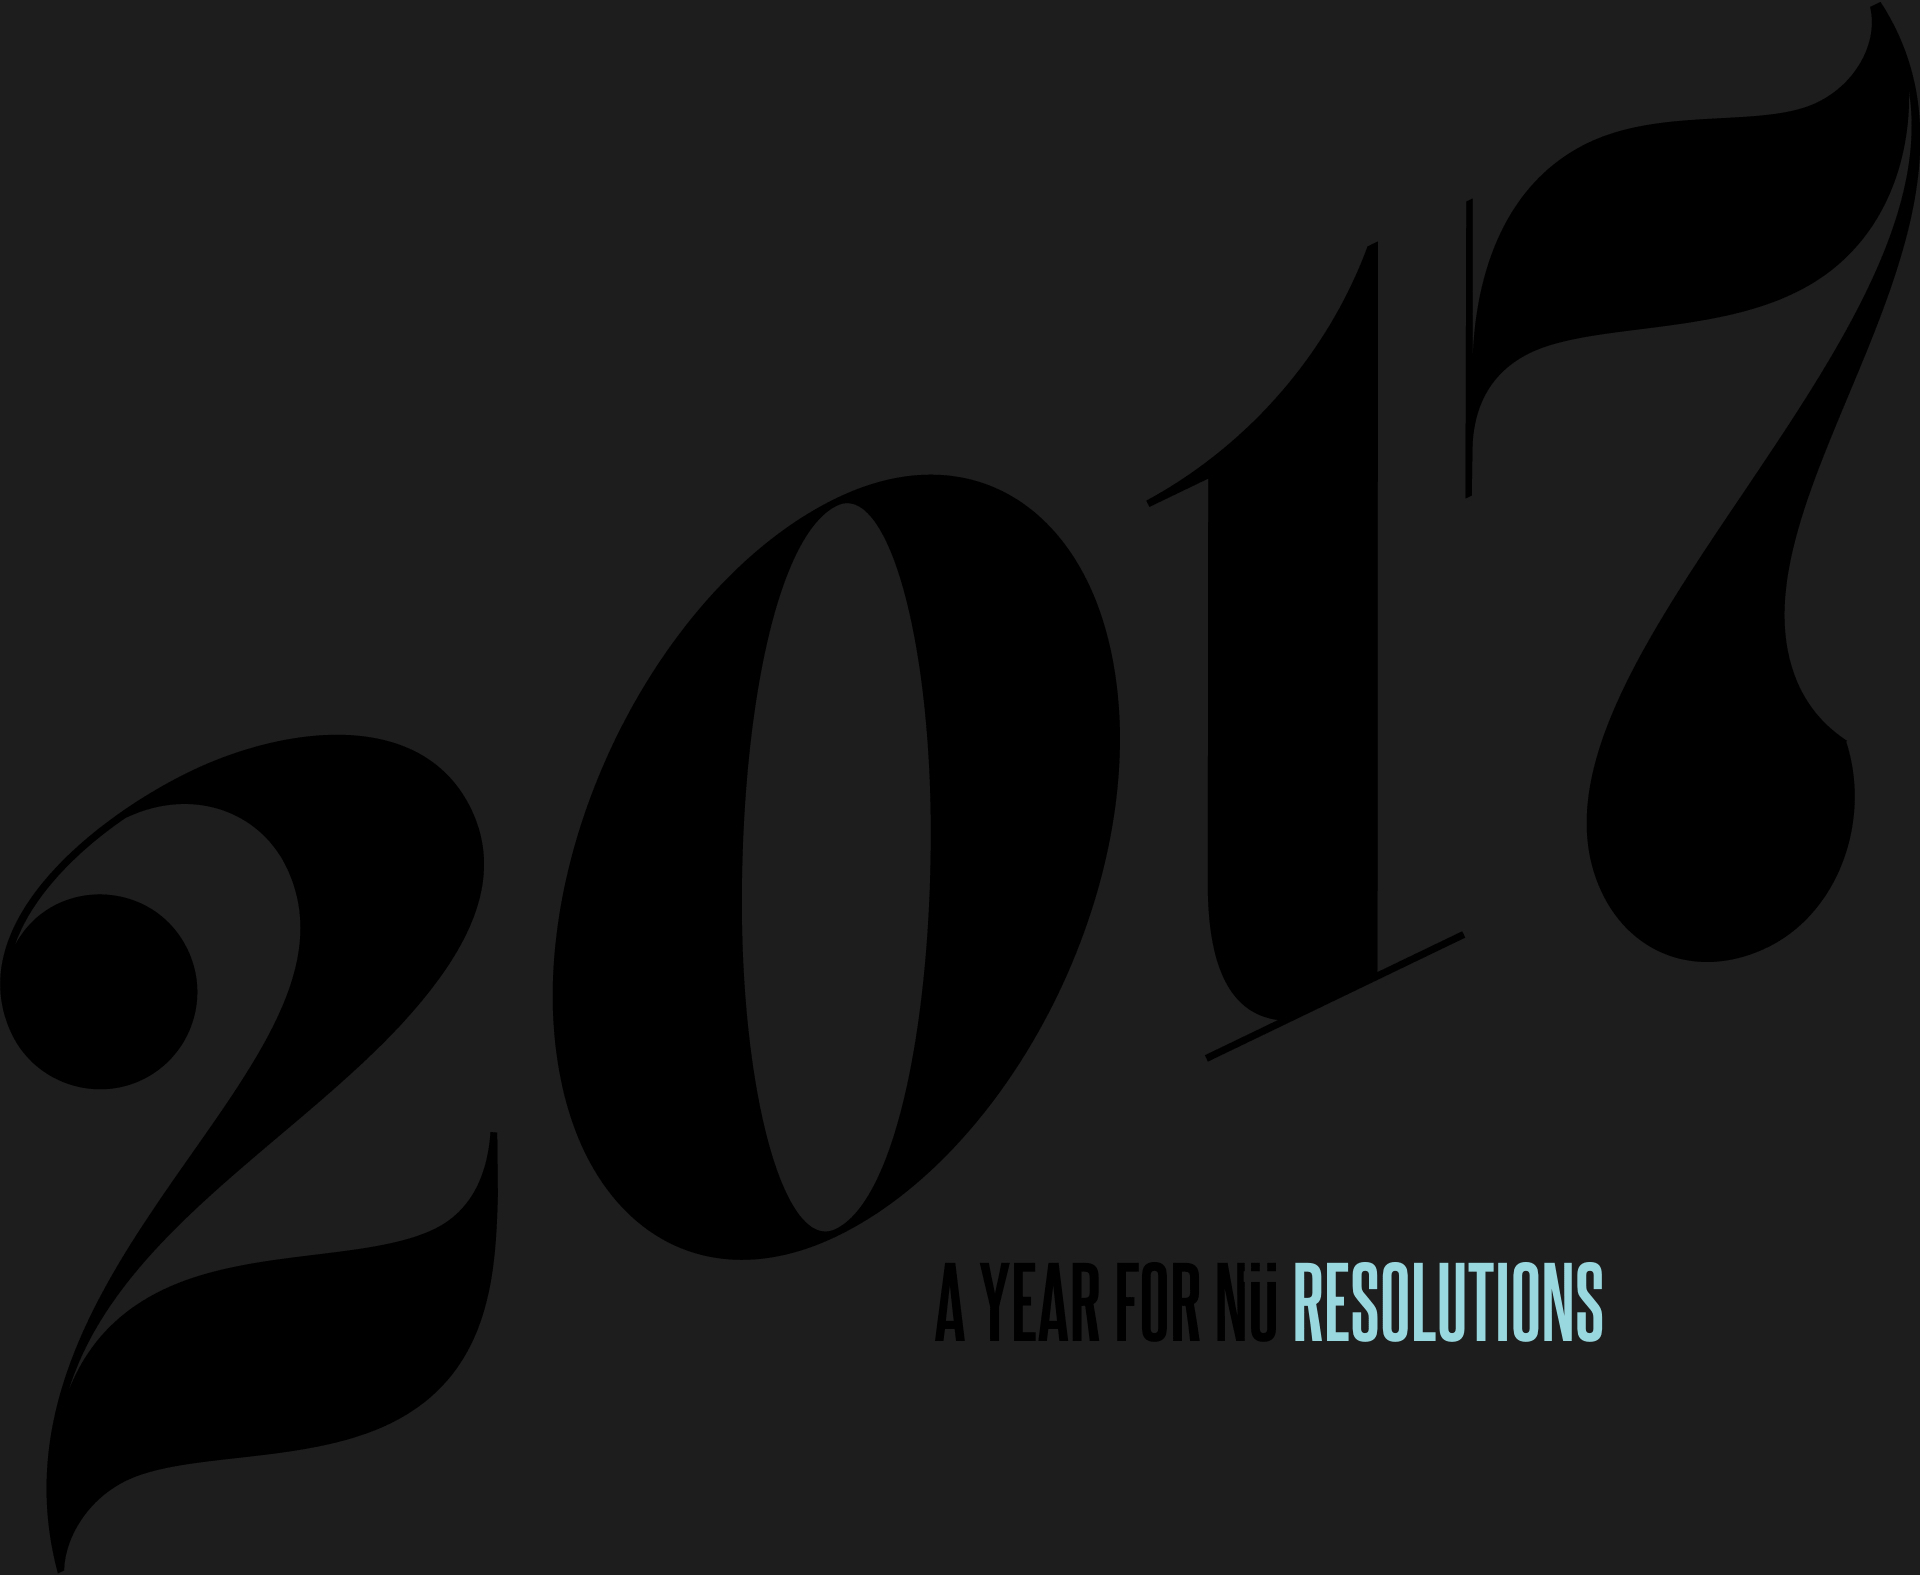 2017 A Year for Nü Resolutions in black with rotating colored words